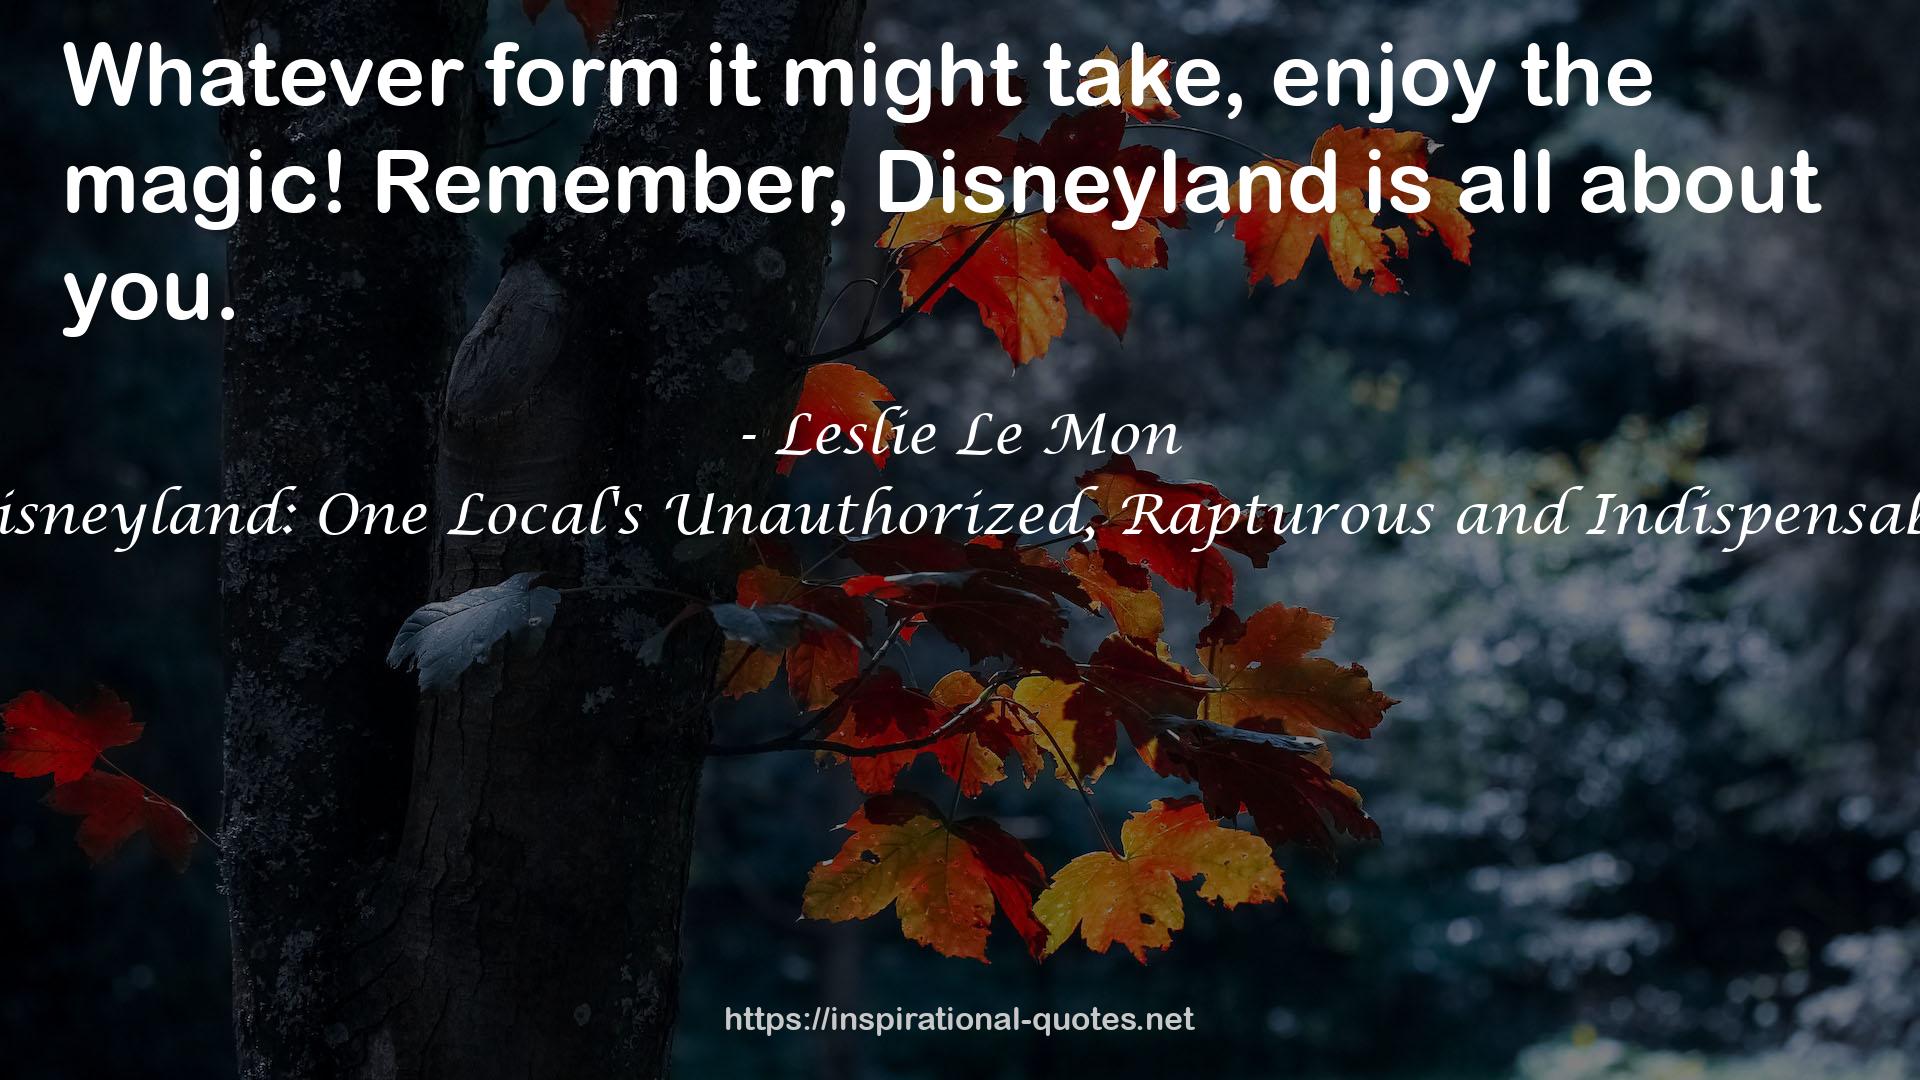 The Disneyland Book of Secrets 2014 - Disneyland: One Local's Unauthorized, Rapturous and Indispensable Guide to the Happiest Place on Earth QUOTES